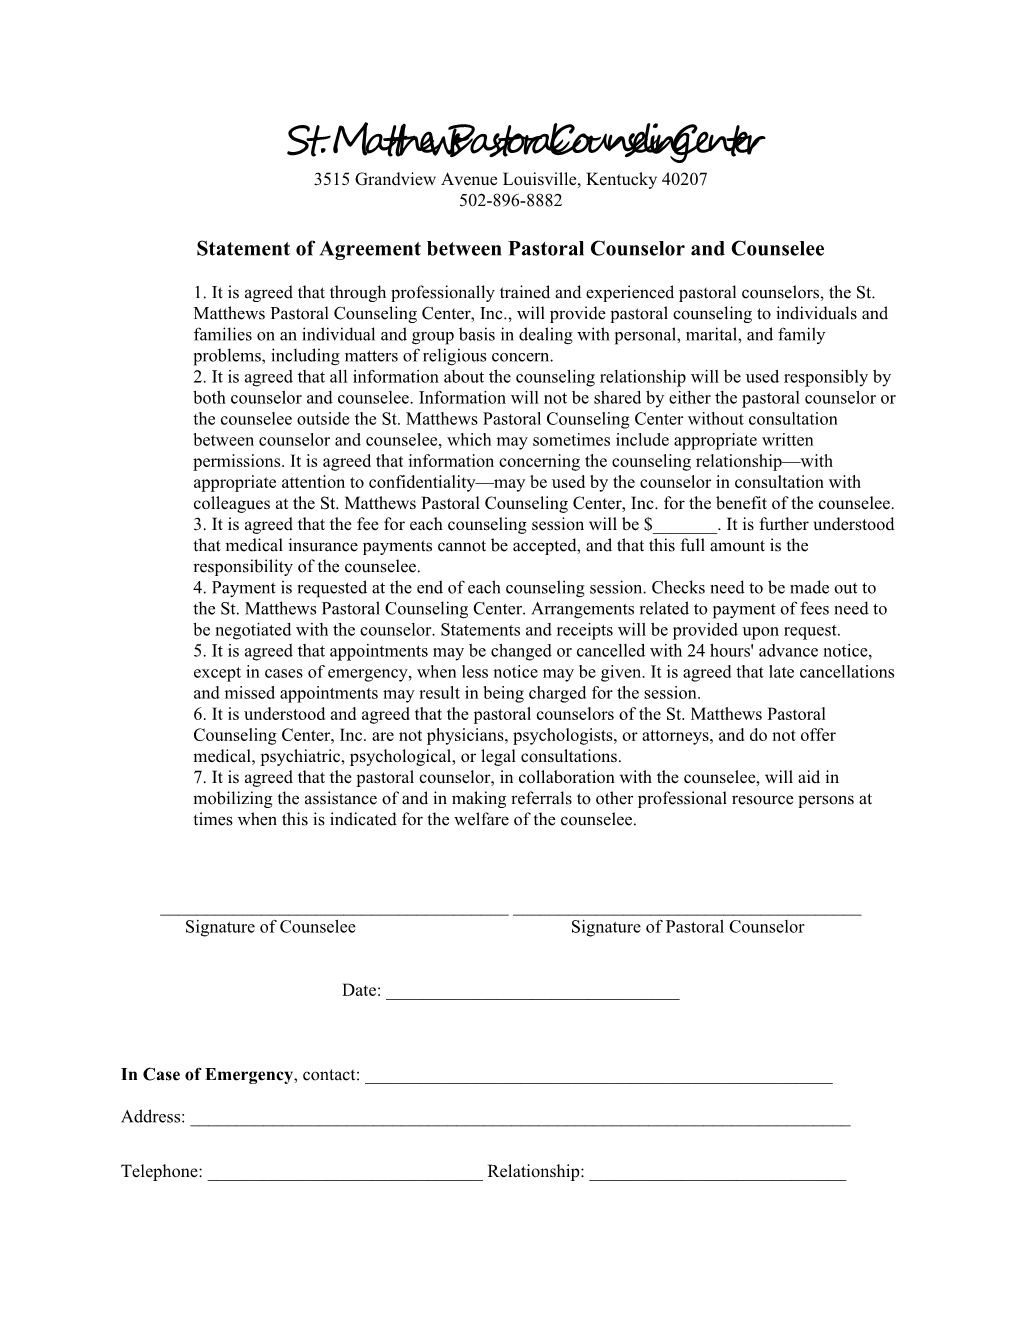 Statement of Agreement Between Pastoral Counselor and Counselee